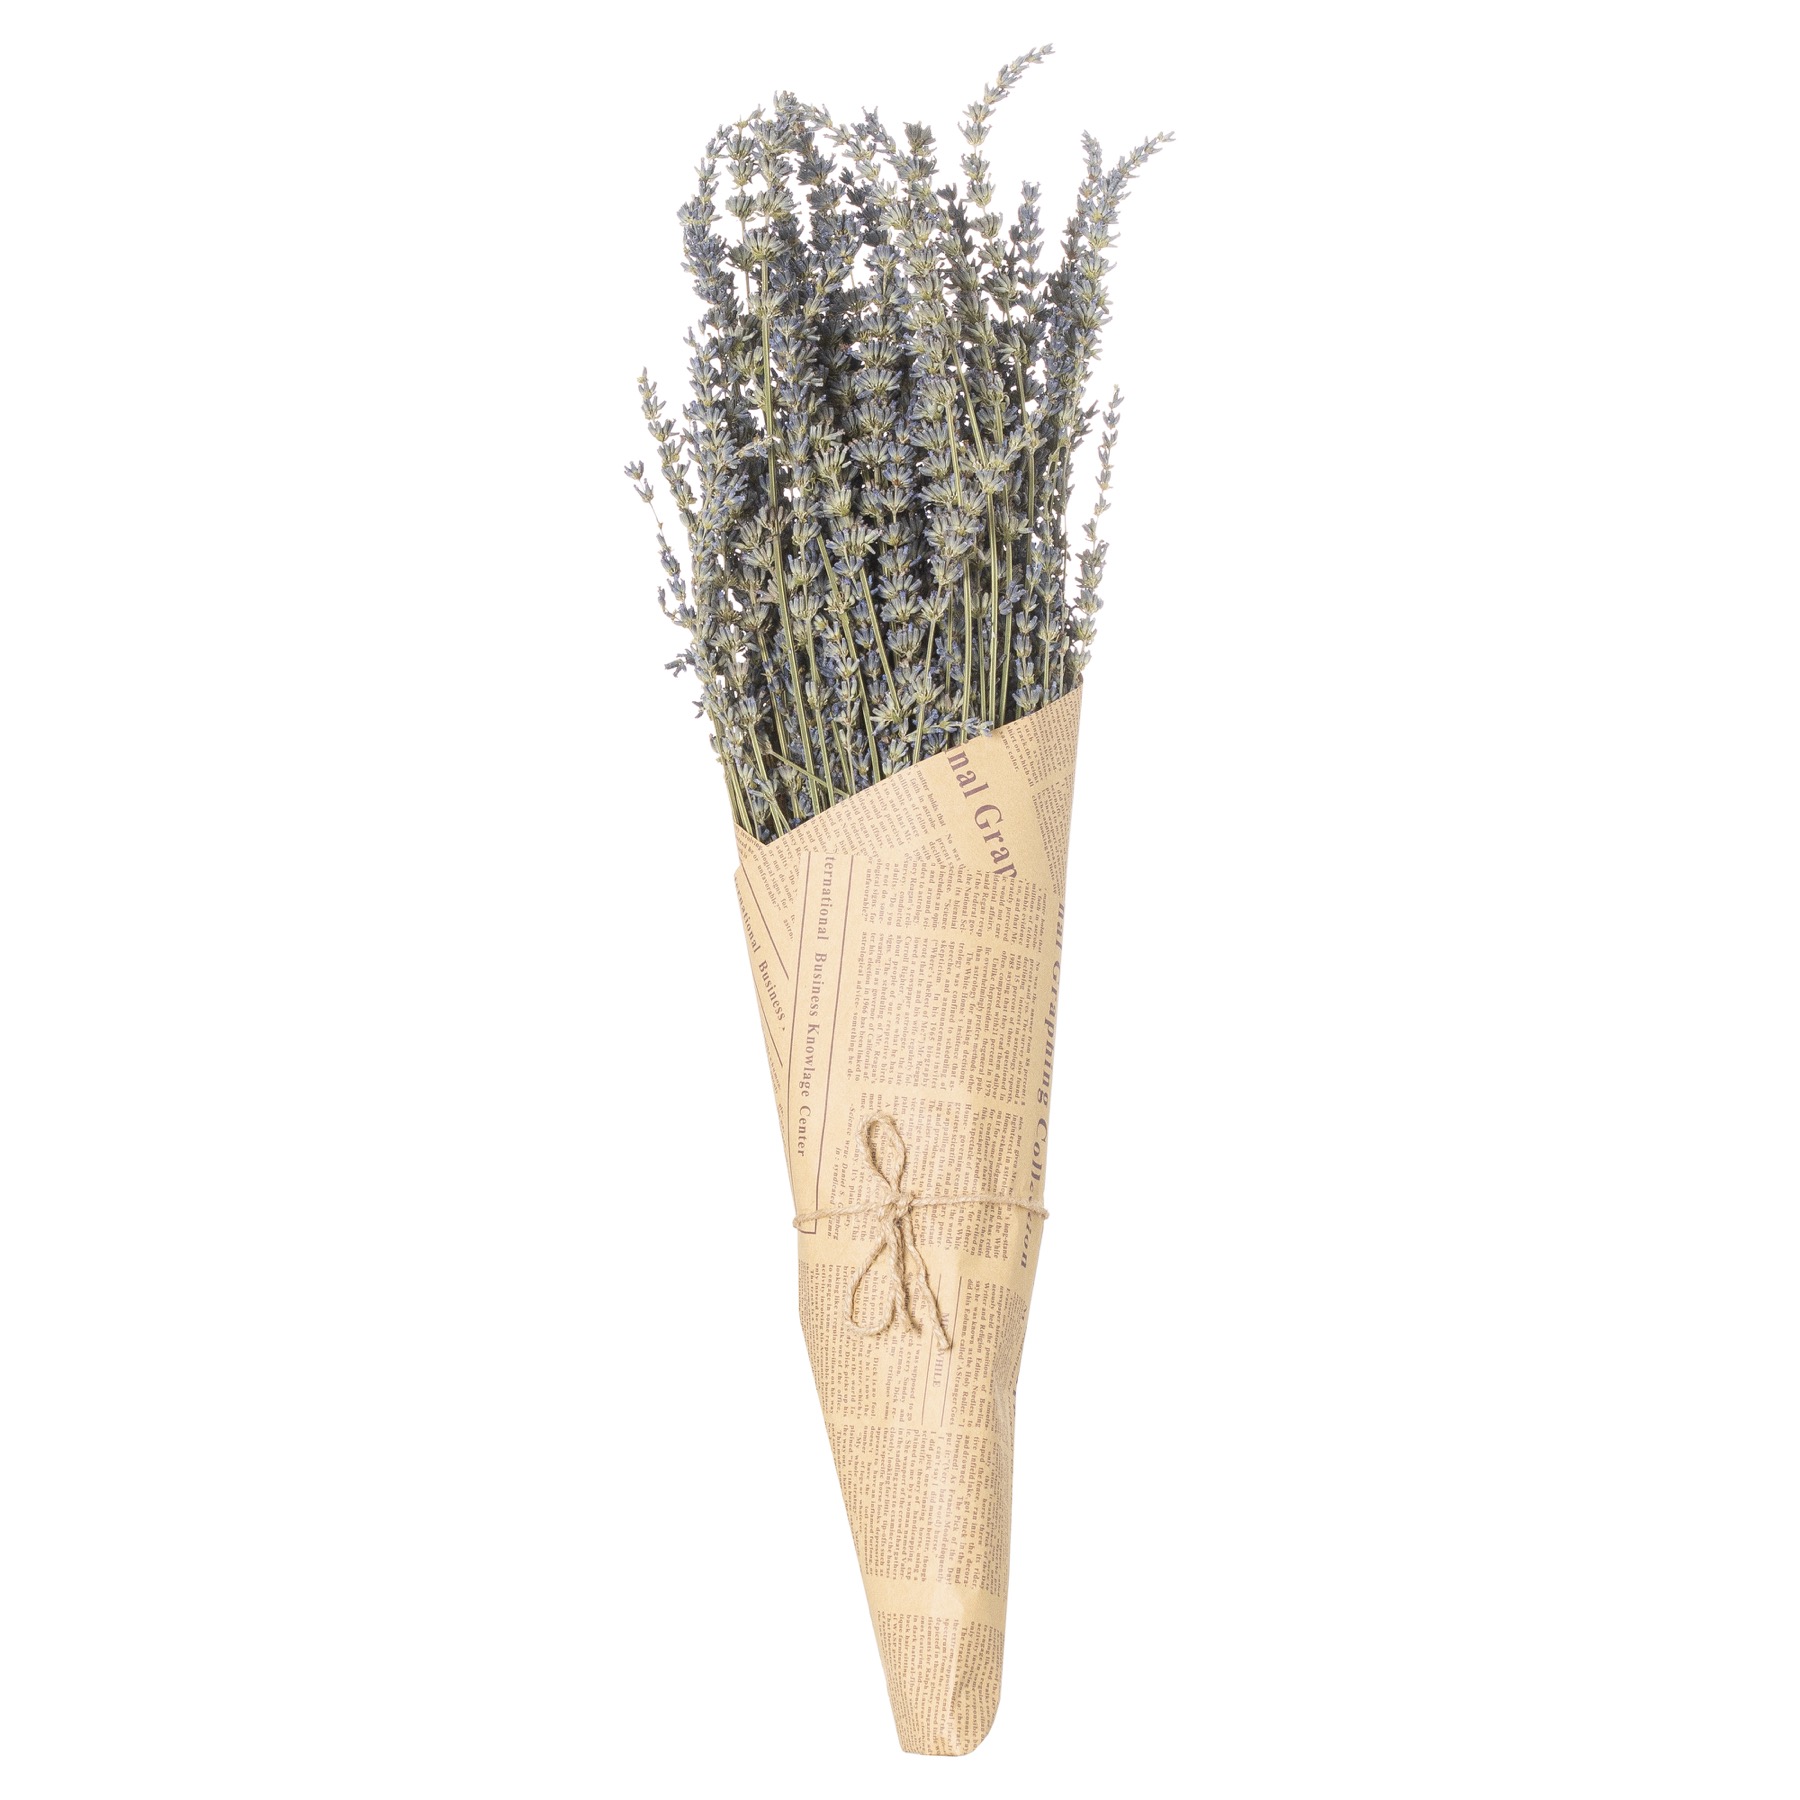 Dried lavender Bunch - Image 1